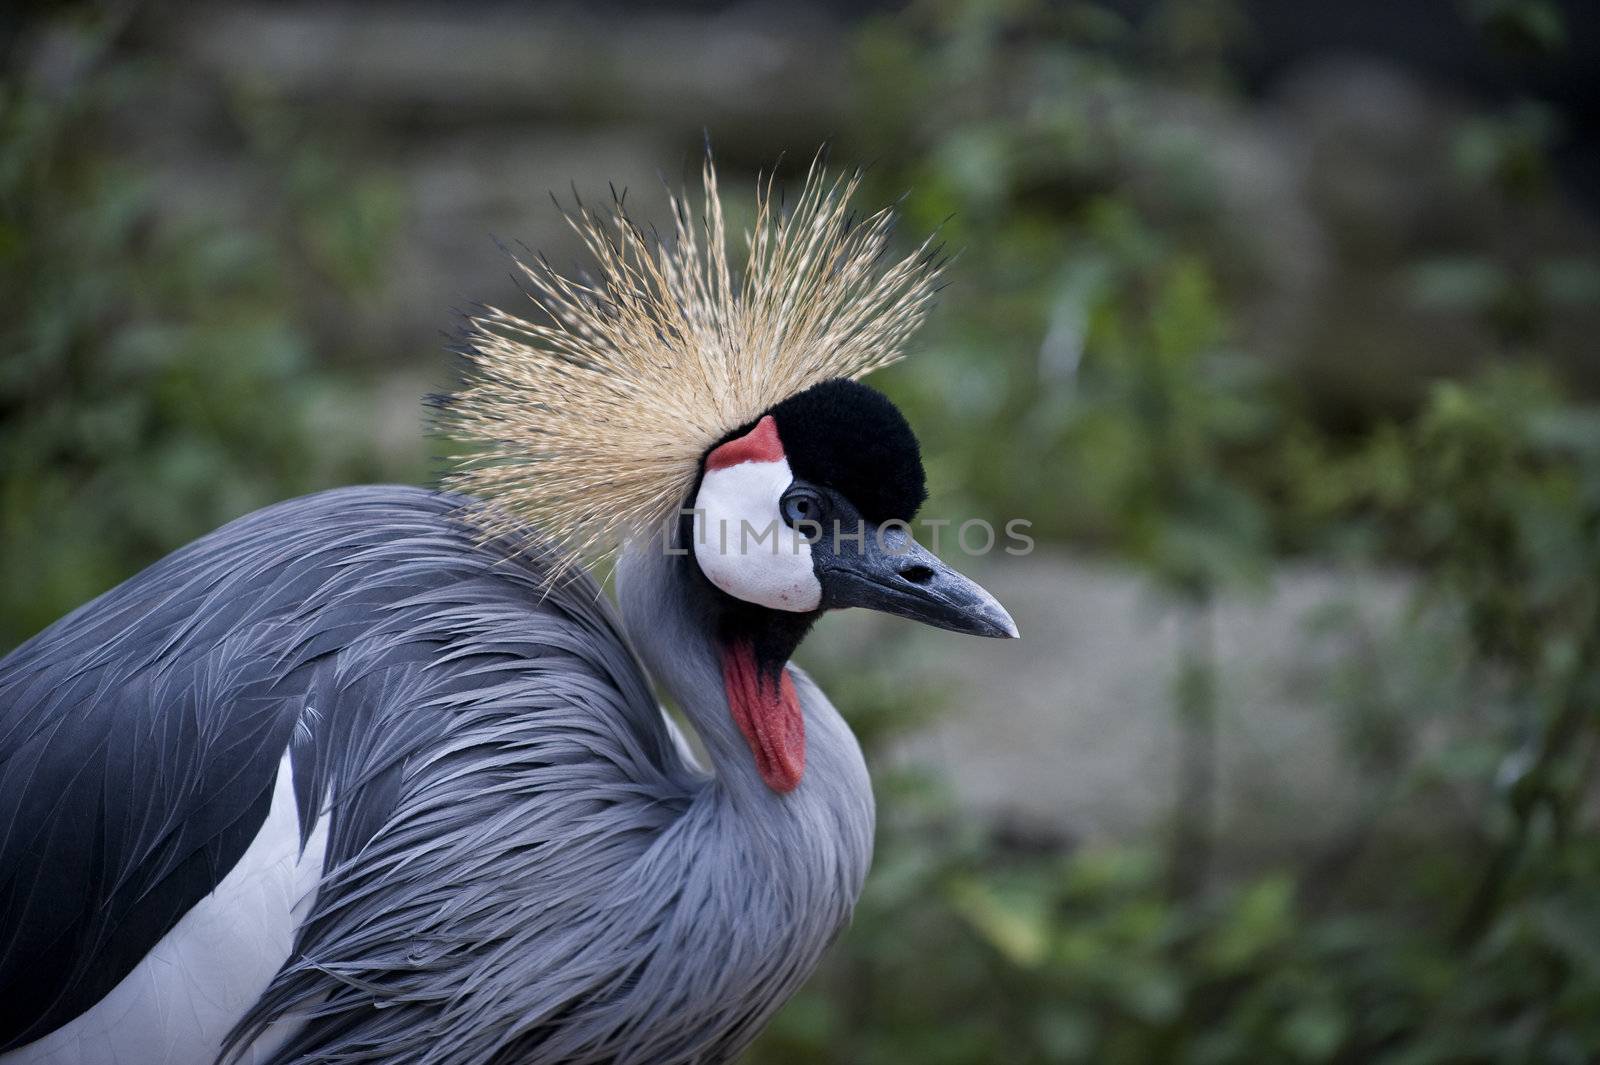 Copenhagen ZOO, Denmark.

East African crowned cranes (also called gray crowned cranes) get their name from a distinctive tuft of bristle-like golden feathers located on the top of the head. They are mostly gray, with white upper and under wing coverts and a black head. They have large white cheek patches with a small triangle of red near the top. The legs and bill are black, eyes are light gray, and have a scarlet throat lappet. Their bill is short in comparison with other cranes. 